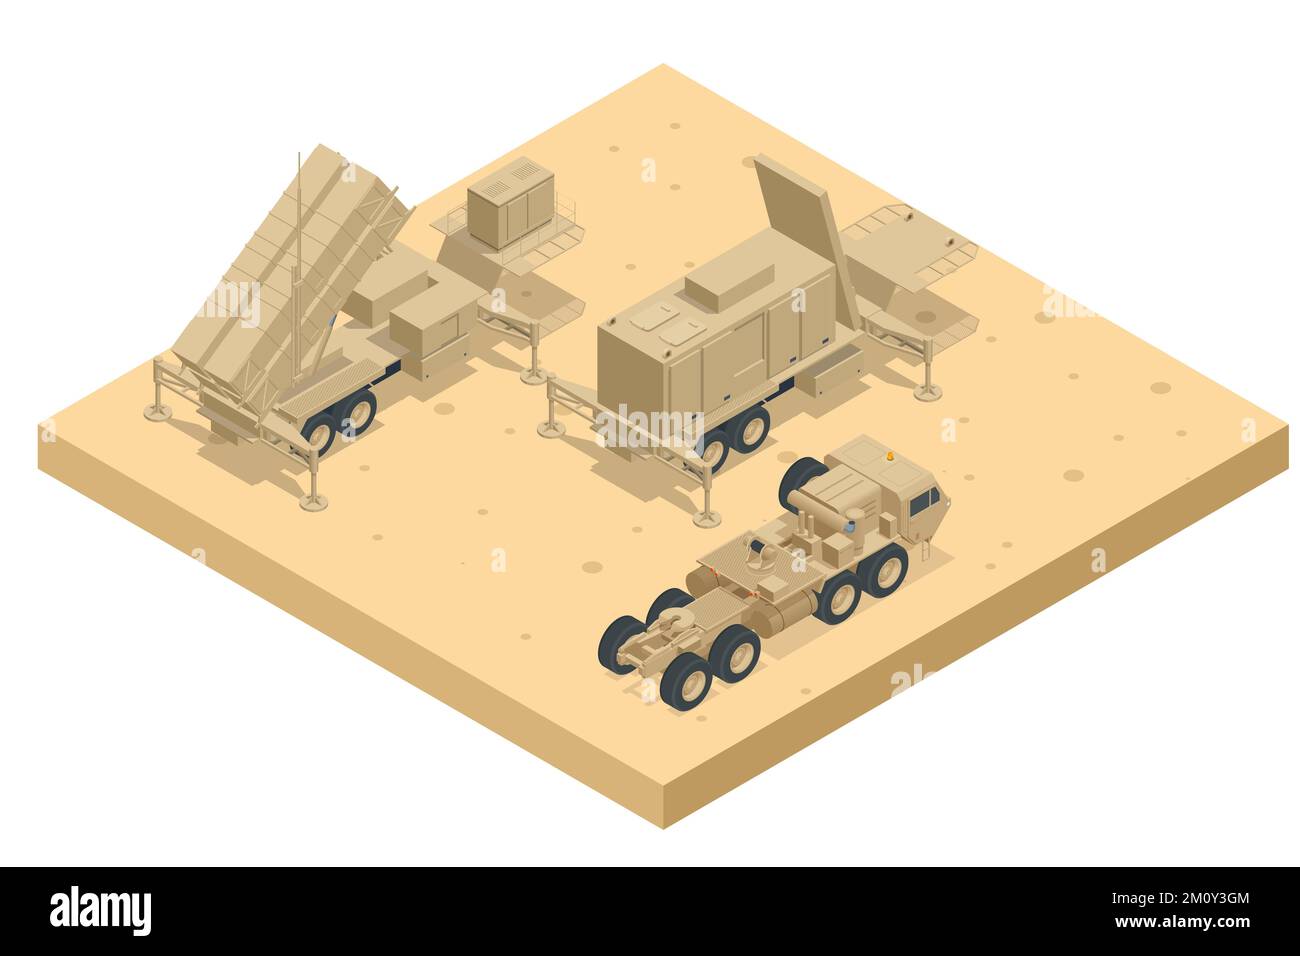 Isometric Mobile surface-to-air missile or anti-ballistic missile system MIM-104 Patriot. American surface-to-air missile system developed by Raytheon Stock Vector